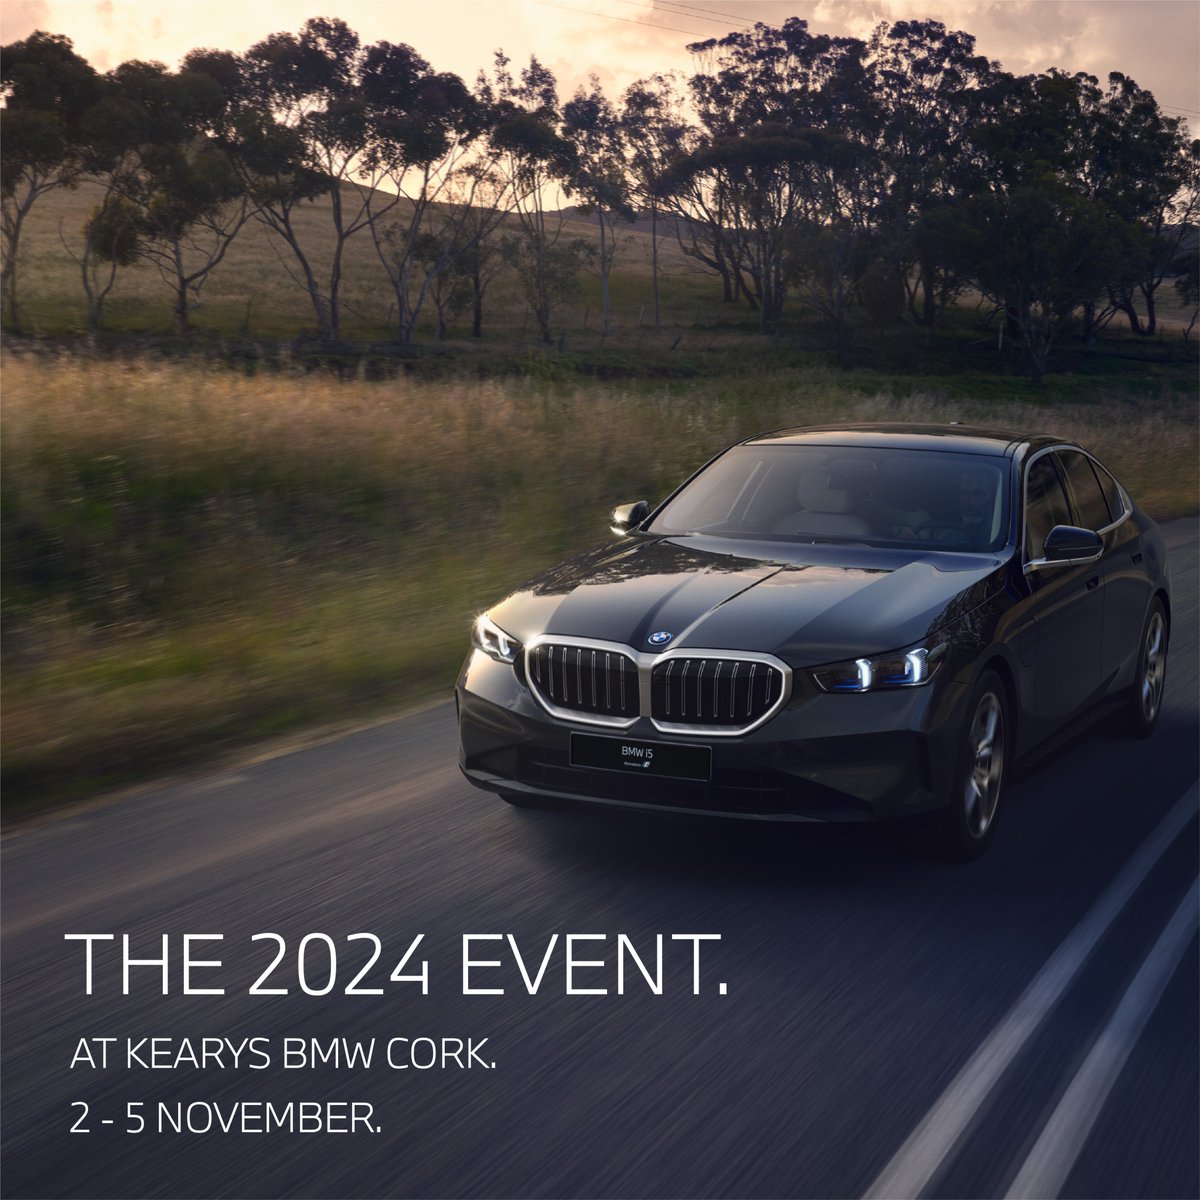 Join us for the Kearys BMW 241 Sales Event. Thurs Nov 2nd - Sun Nov 5th Starting from 5.9% APR. Order your 241 this weekend and choose from a range offers... OR ENTER OUR DRAW TO WIN €10K! Book your appointment below now! kearys.ie/bmw/new-cars/o… Call us on: 021 500 3600